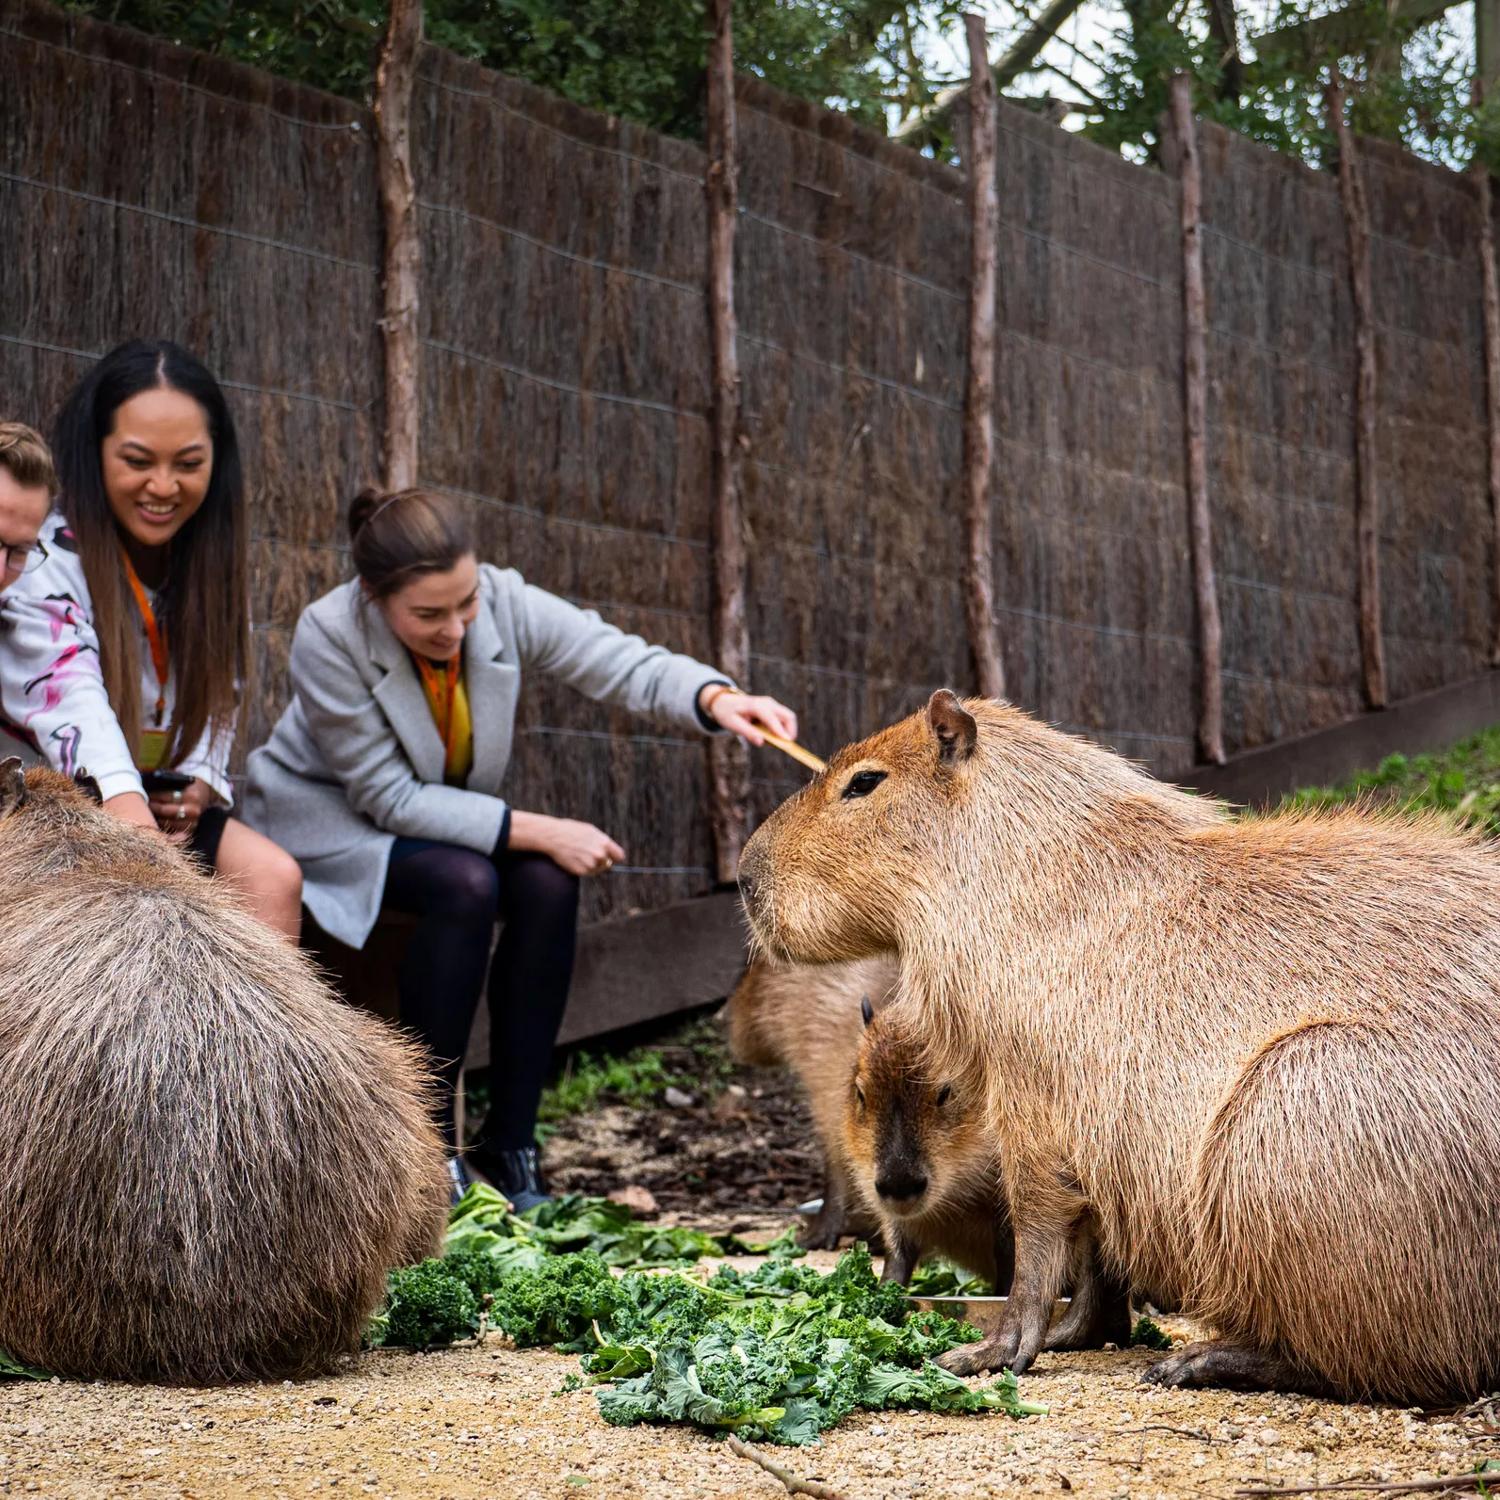 Three people sit on a wooden bench at the Wellington Zoo and pet three Capibaras who are eating leafy greens. 